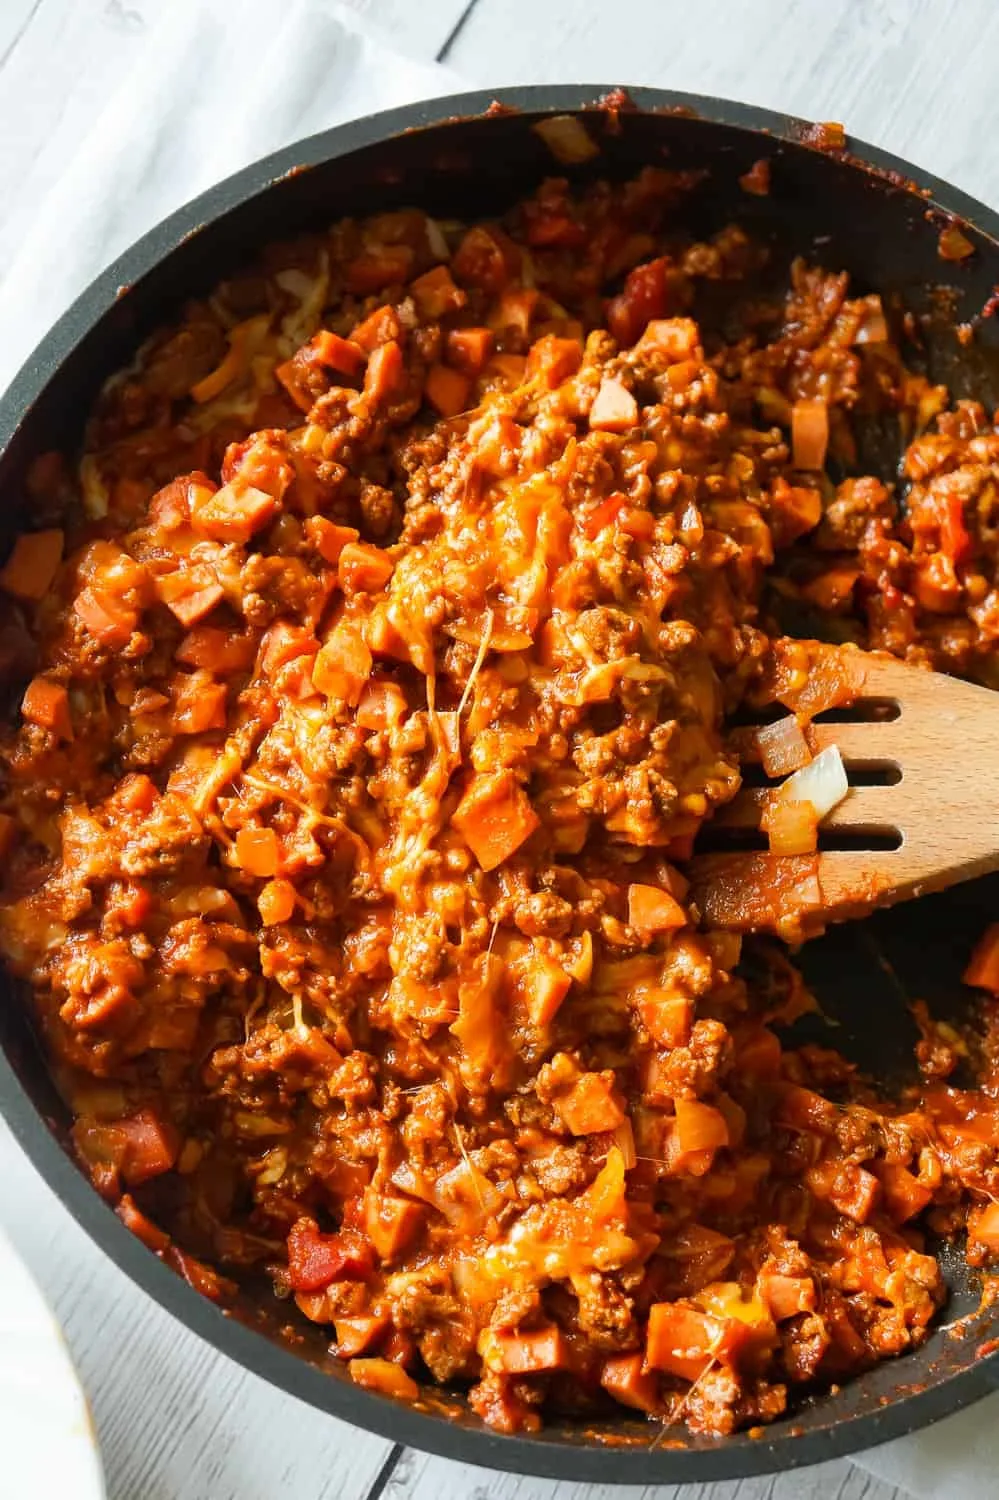 Chili Cheese Dog Sloppy Joes are an easy ground beef dinner recipe perfect for weeknights. These homemade sloppy joes are loaded with chopped wieners, shredded cheese, and onions all tossed in a chili sauce with a bit of a kick.